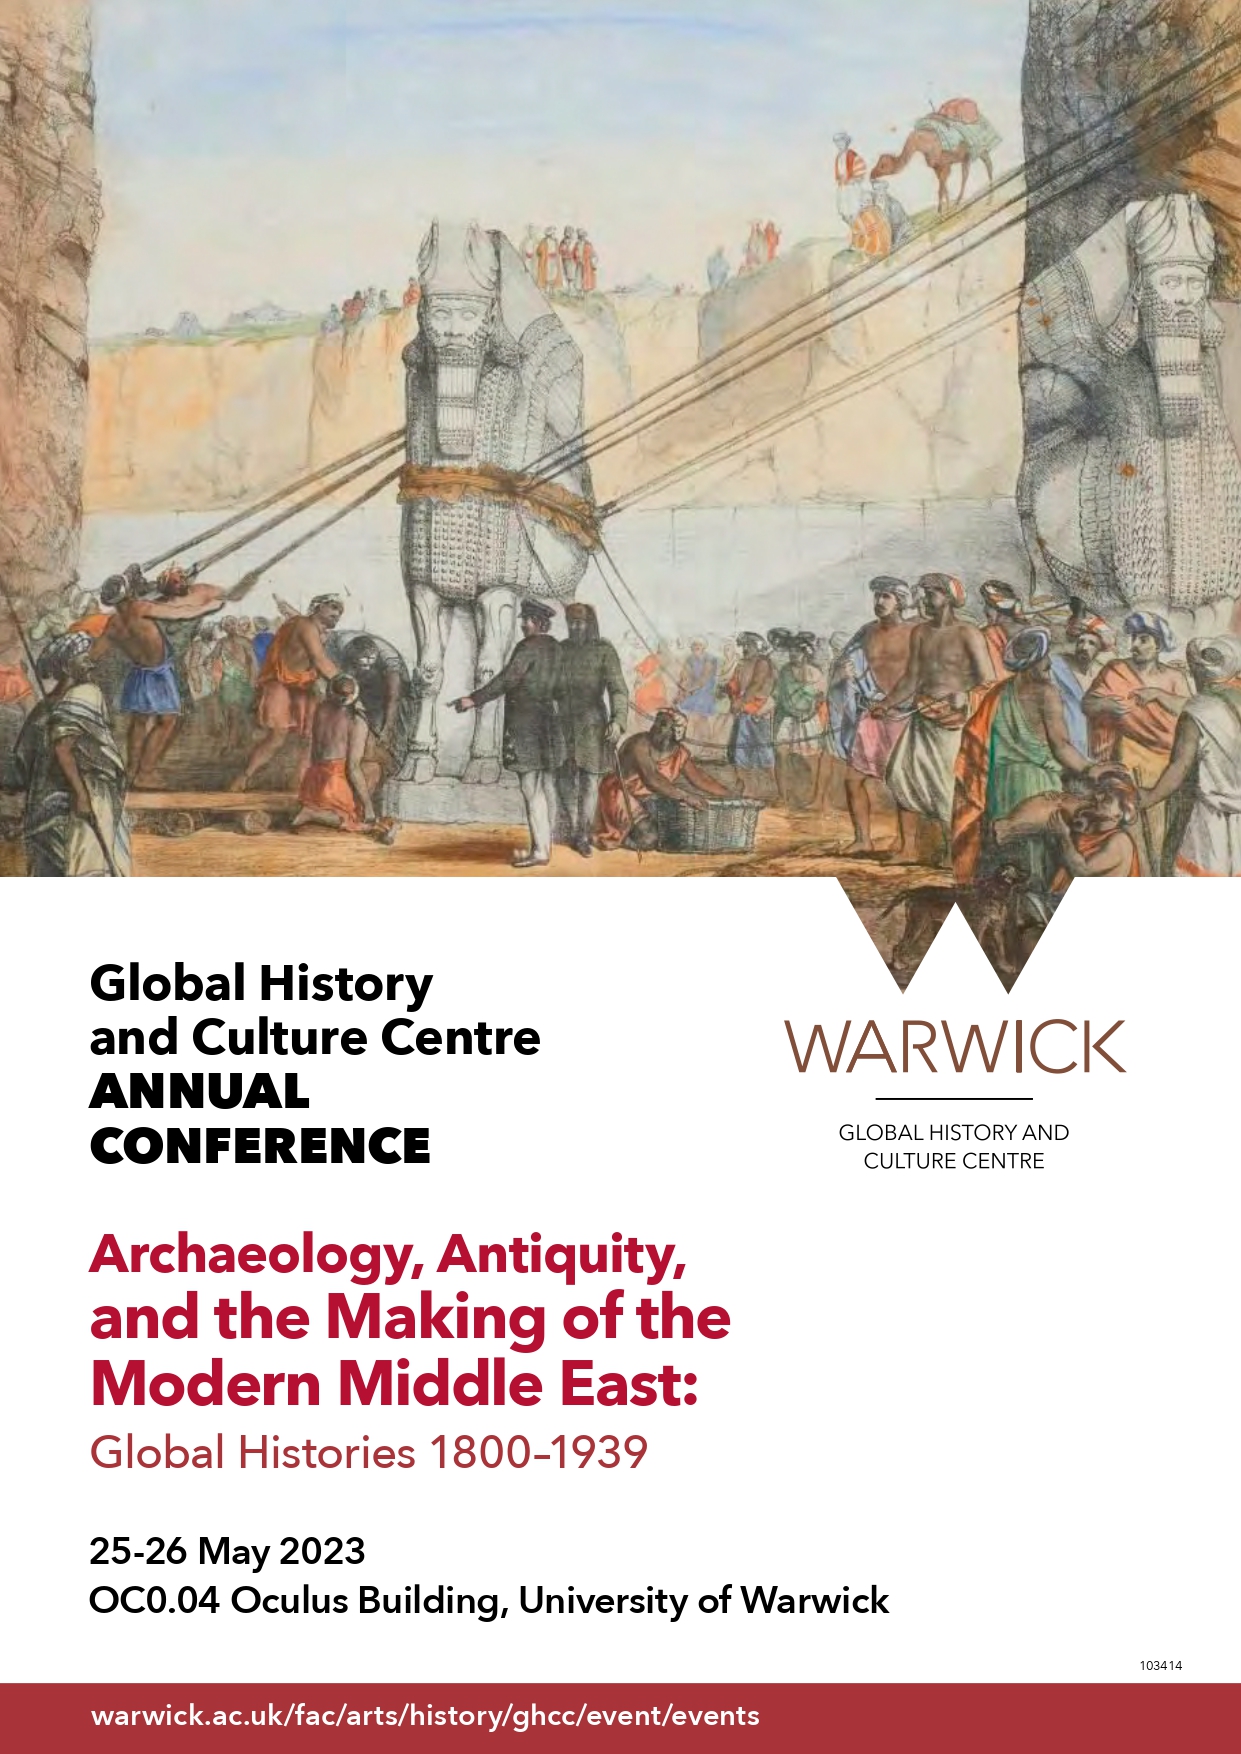 Poster for the GHCC Annual Conference: Archaeology, Antiquity, and the Making of the Modern Middle East: Global Histories 1800-1939, via the University of Warwick (2023) all rights reserved